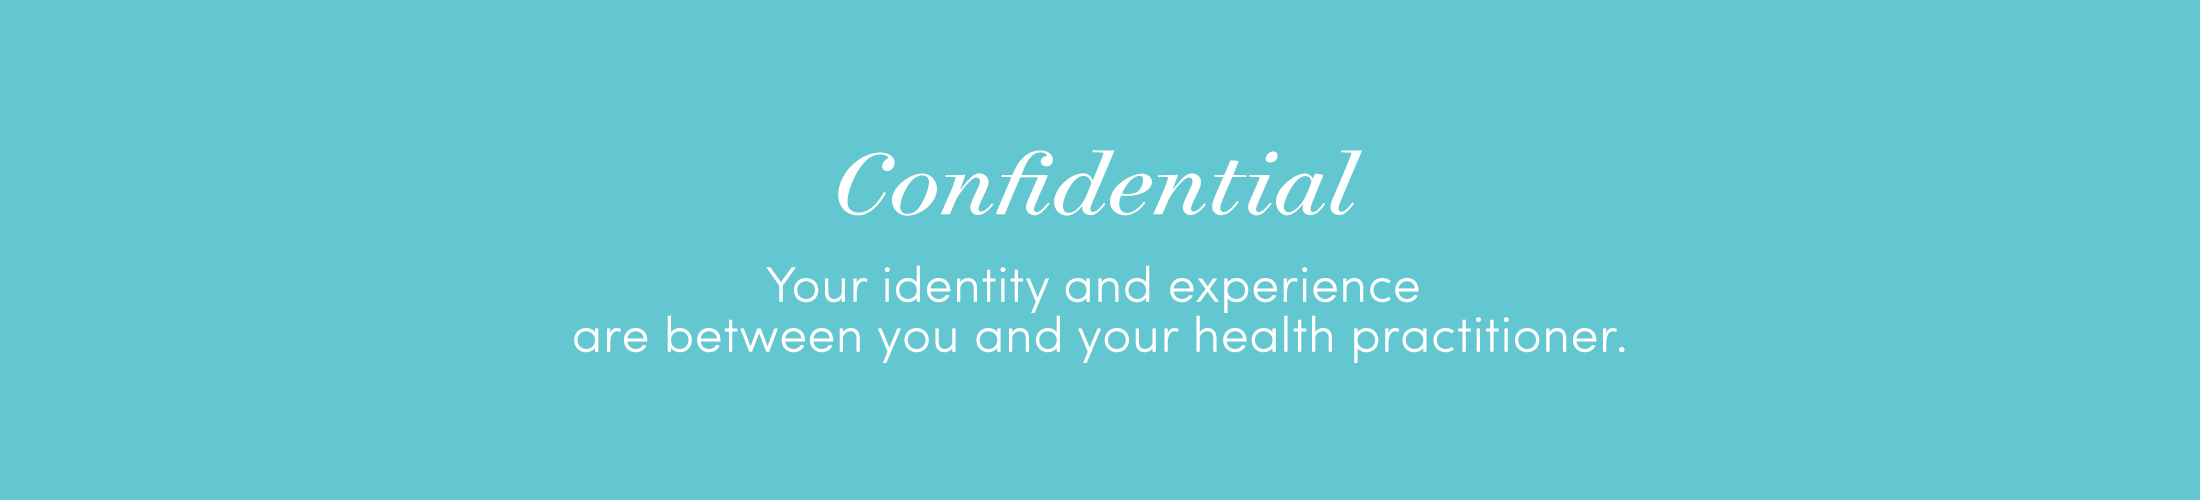 Confidential Your identity and experience are between you and your health practitioner